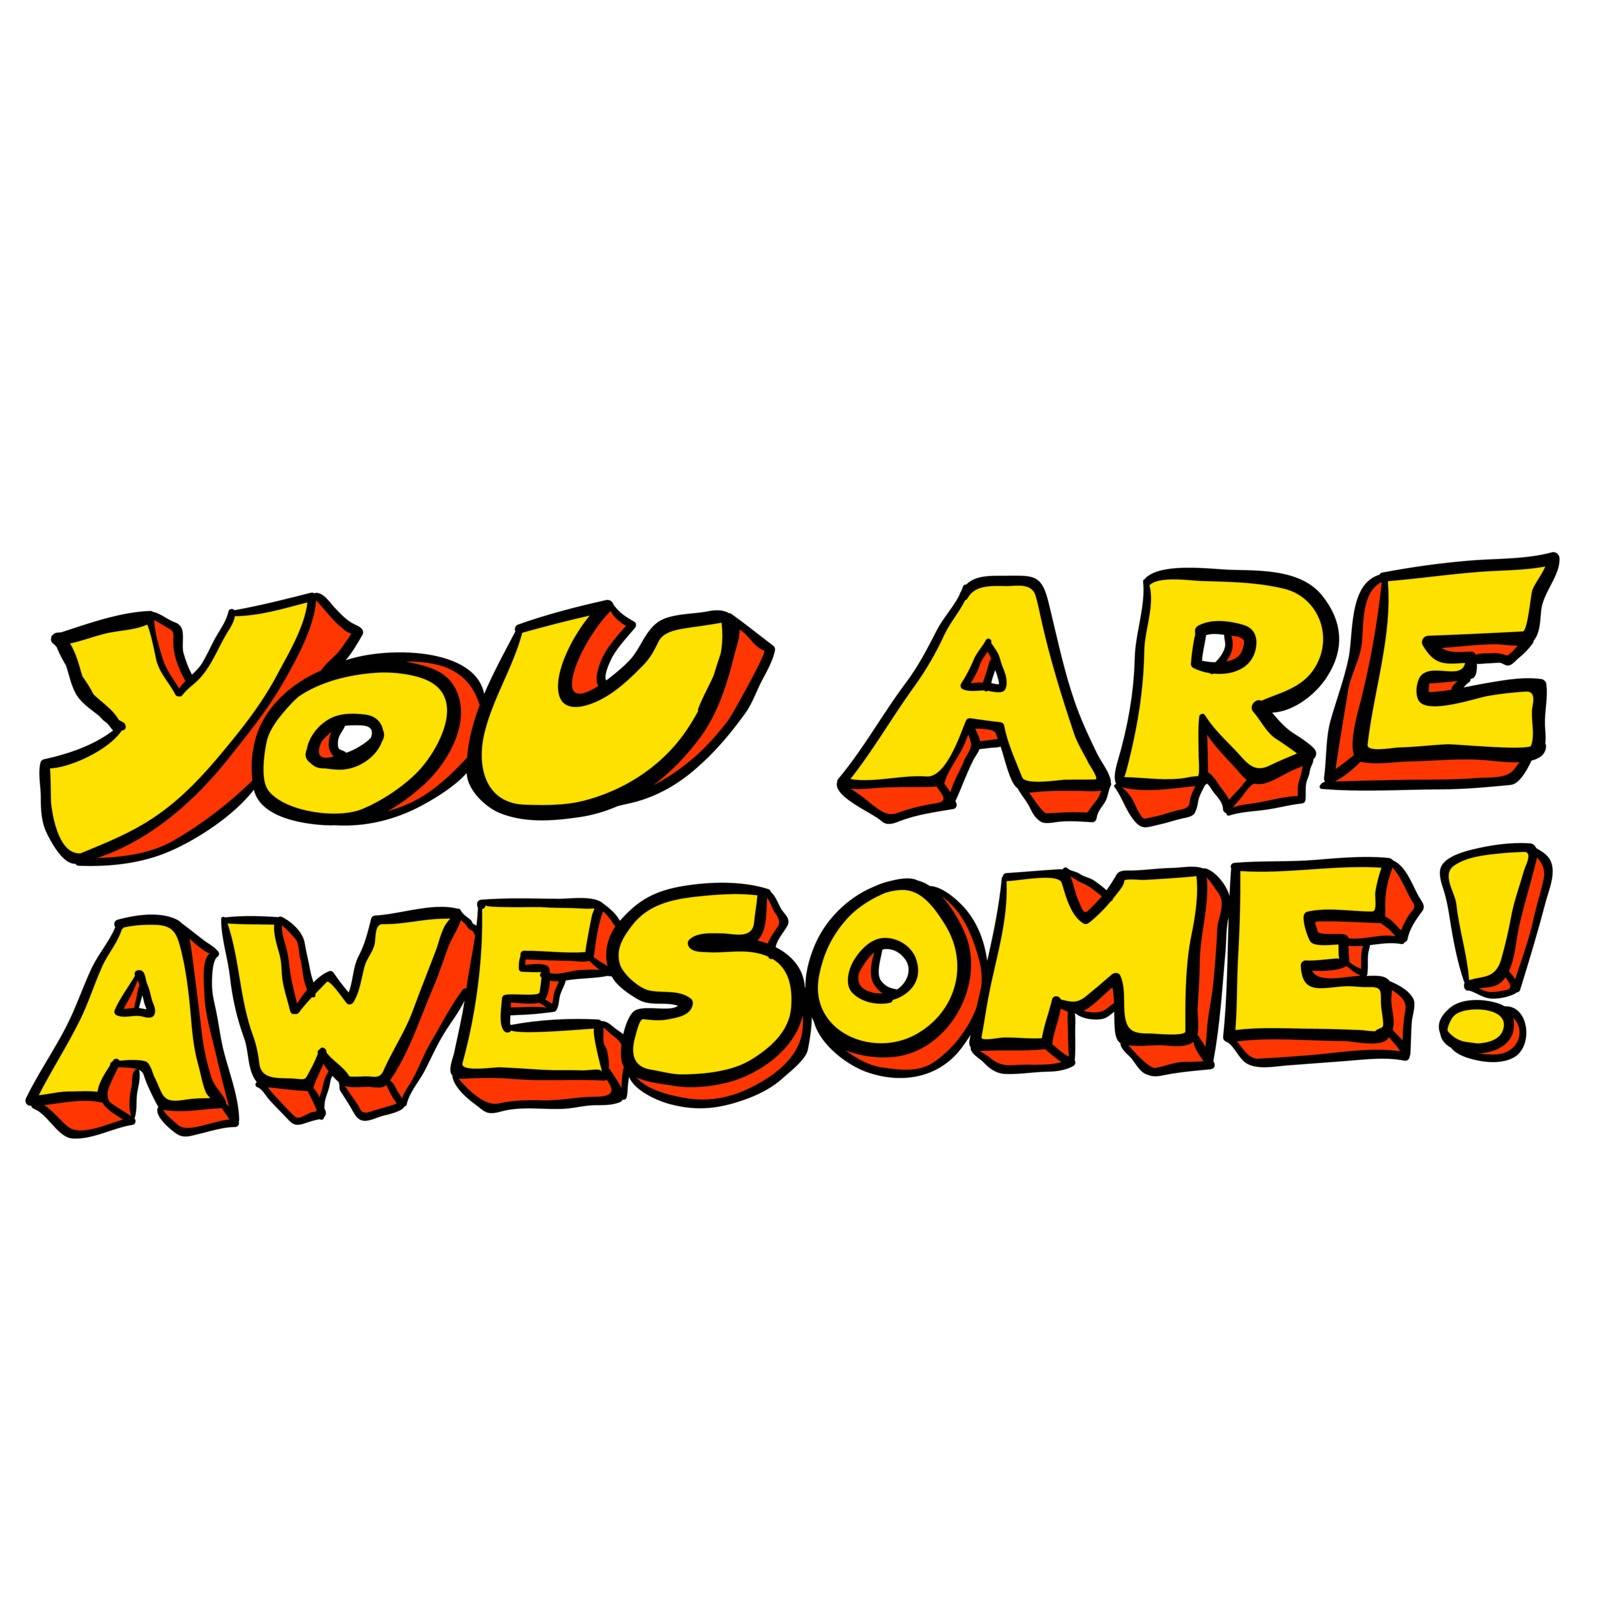 freehand drawn cartoon illustration of you are awesome text